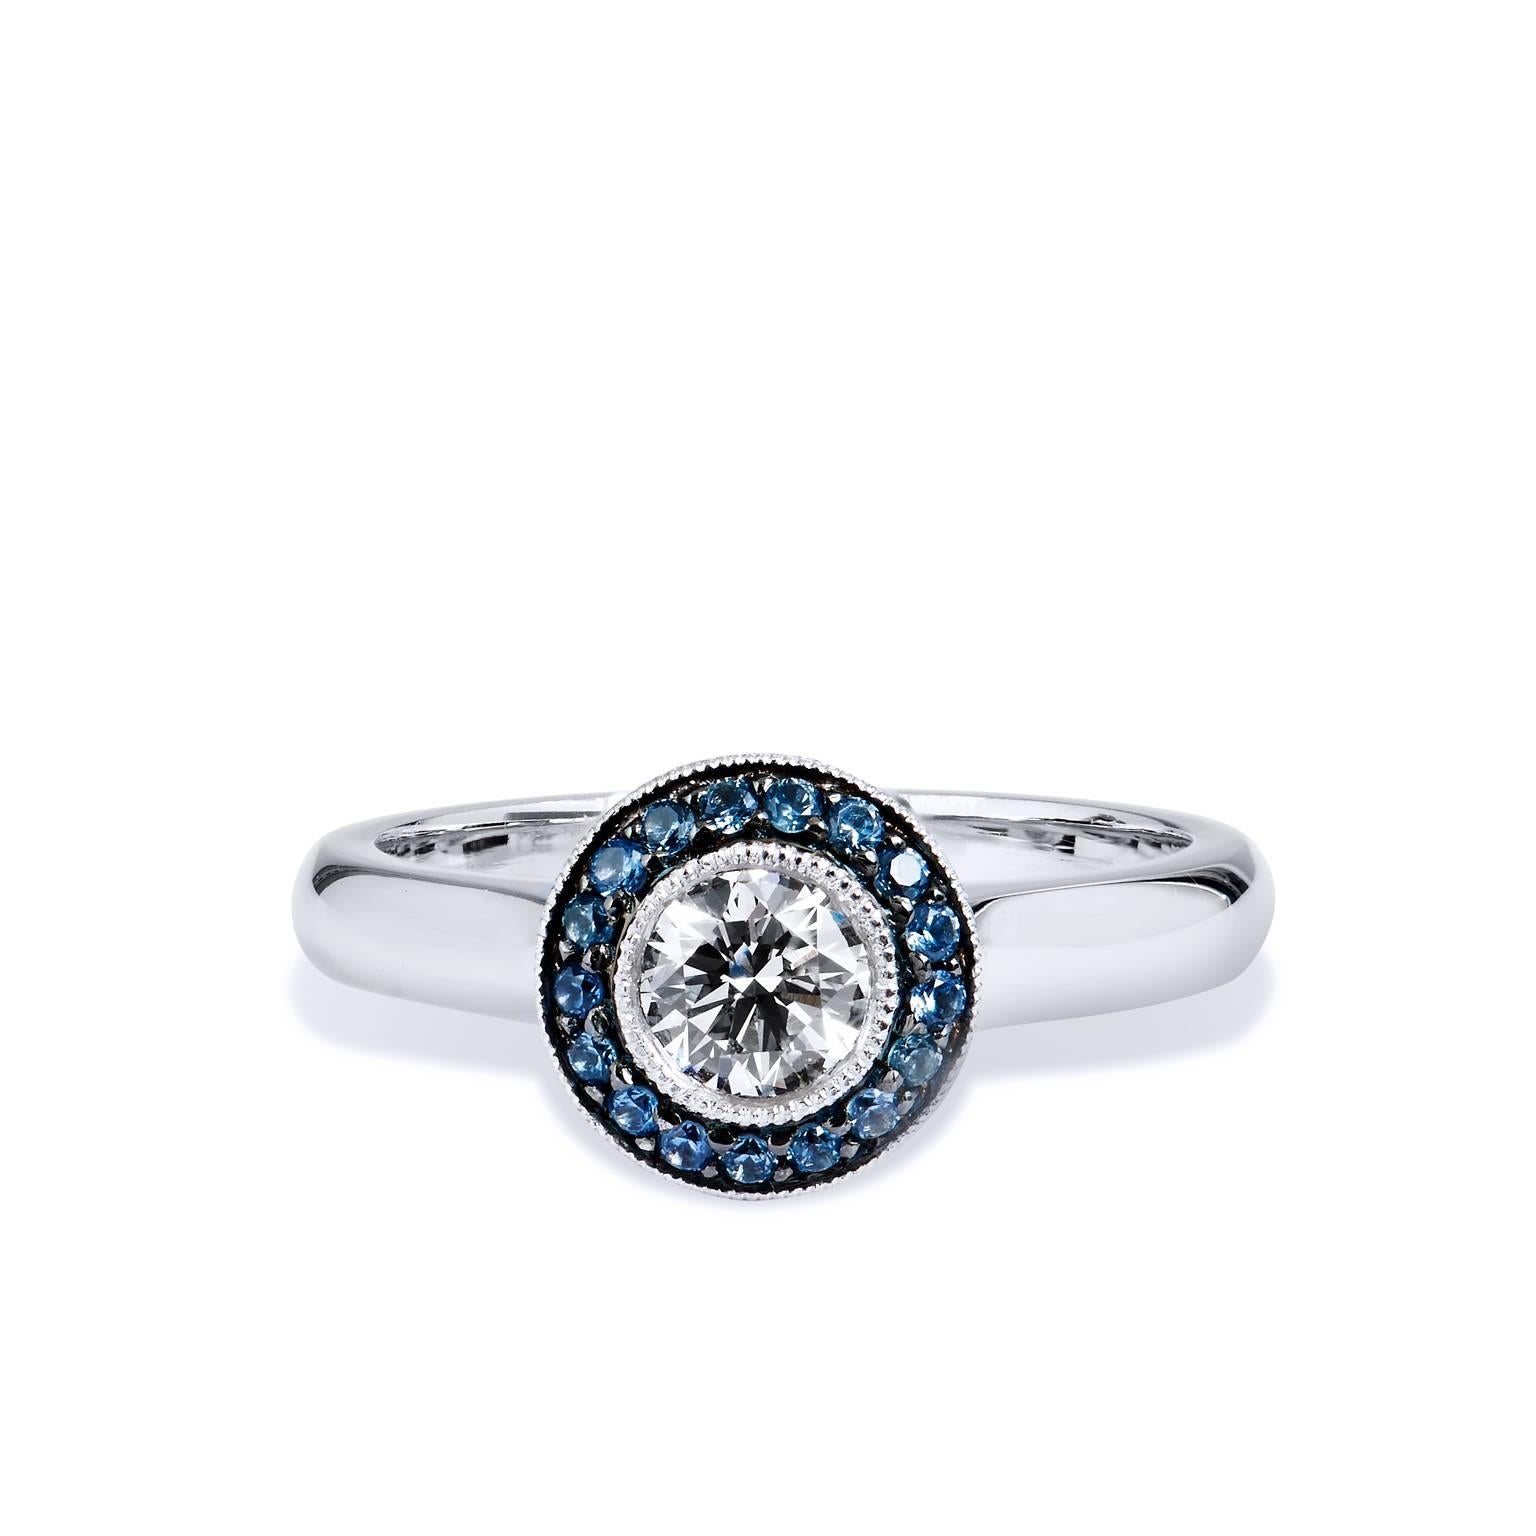 Handcrafted in 18kt white, this ring features a .51ct GIA certified center diamonds graded G SI1. Encompassing the center diamond are 17 pieces of light blue pave set sapphire that weigh .15ct total. This is a one-of-a-kind, original H&H design.